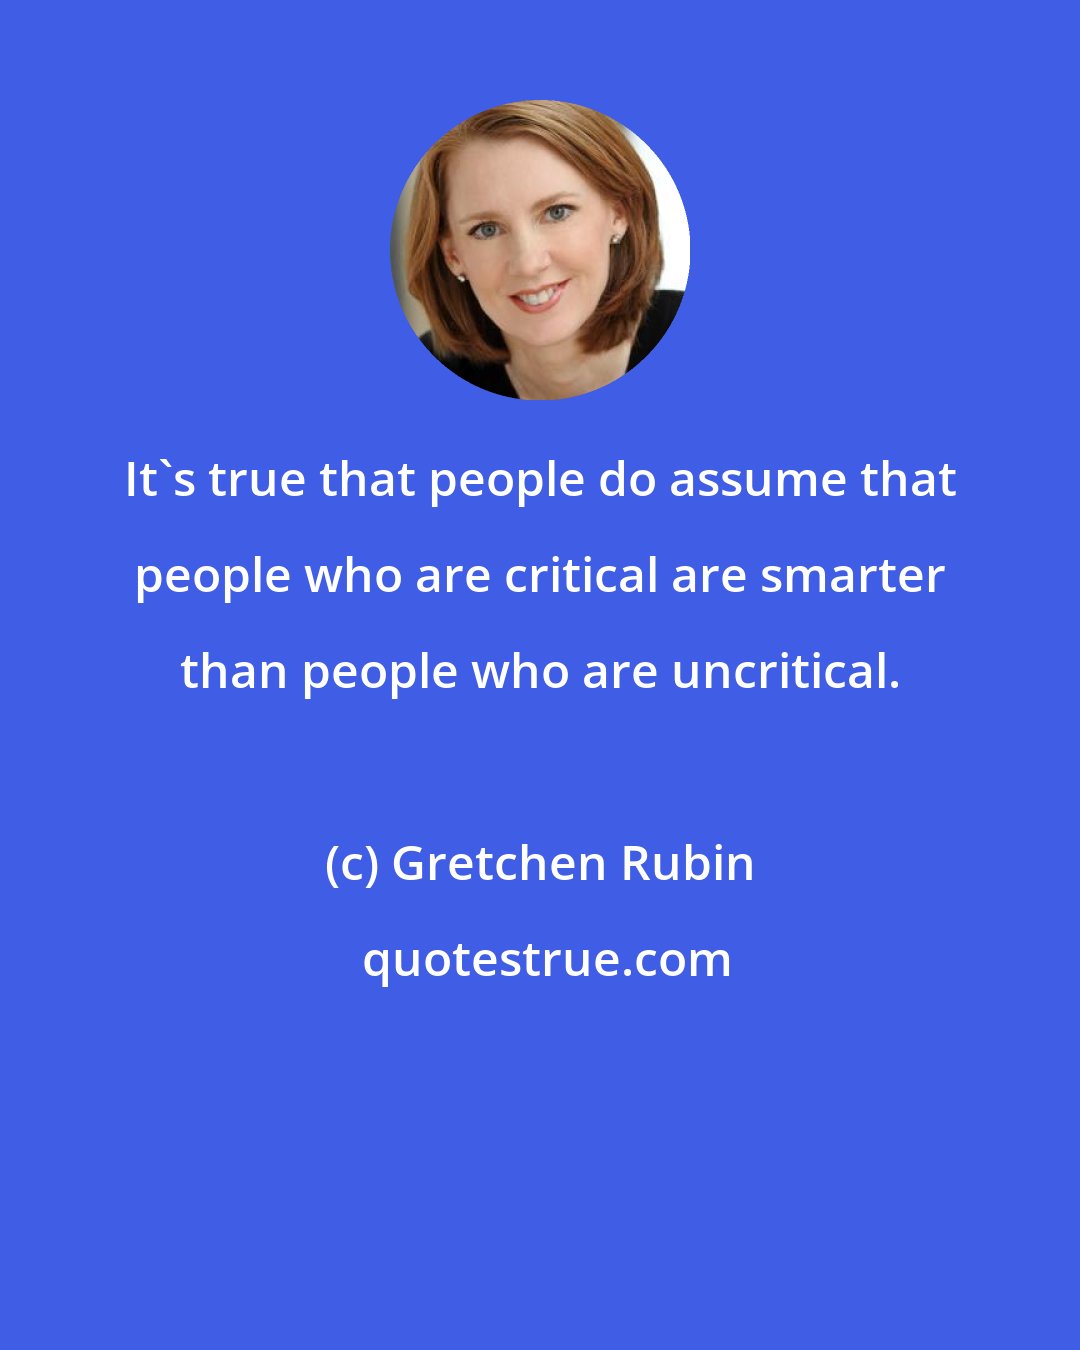 Gretchen Rubin: It's true that people do assume that people who are critical are smarter than people who are uncritical.